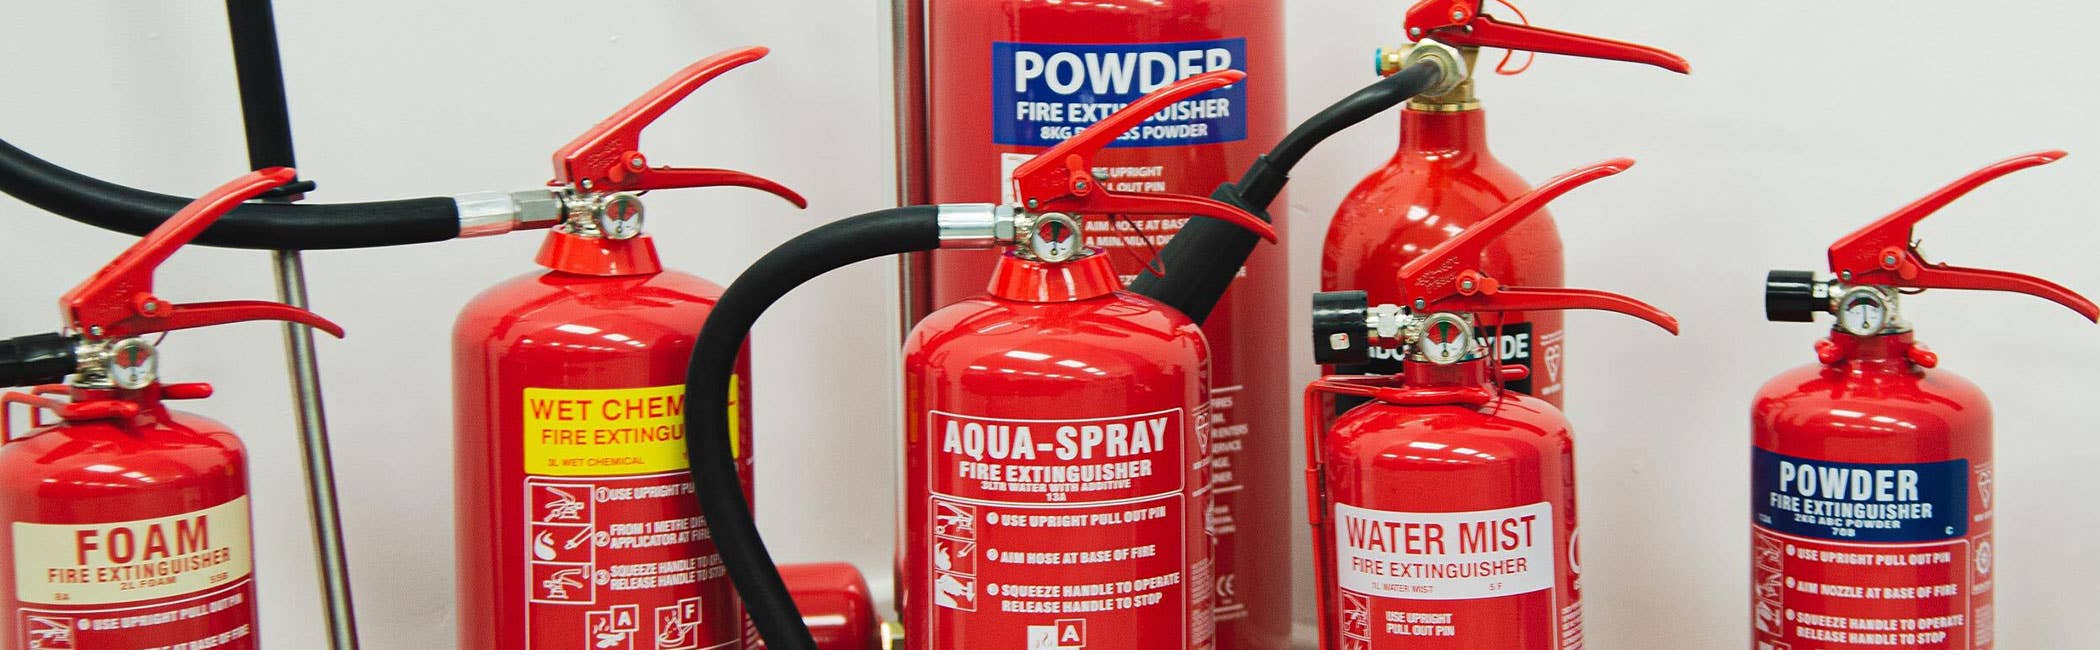 Types of Fire Extinguishers - Colours, Signage & Fire Classes